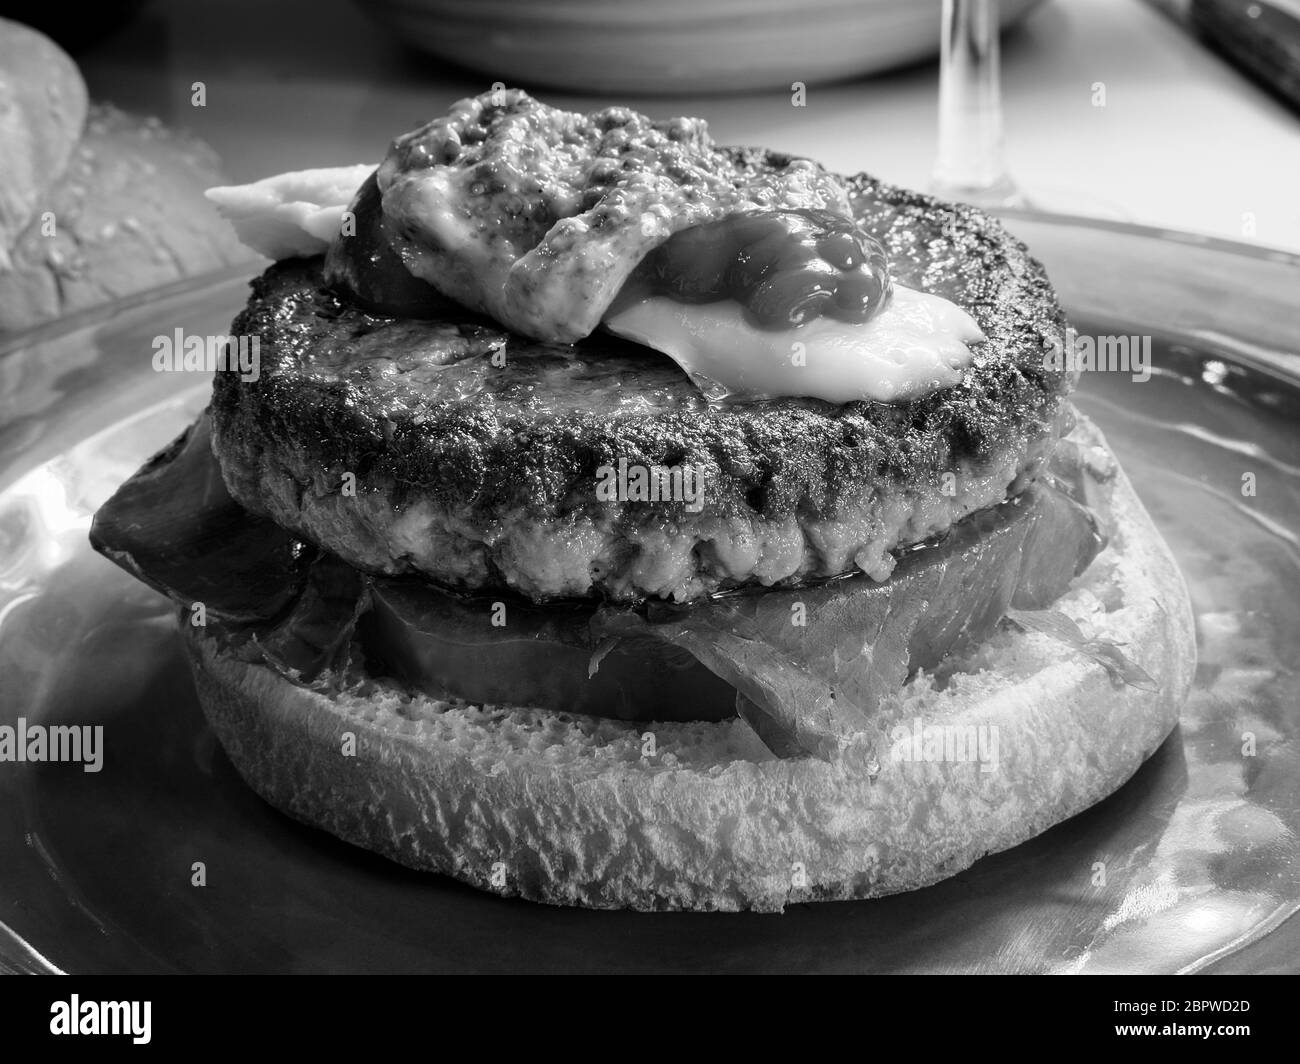 Tasty beef burger with cheese, ketchup and mustard. Gourmet food in black and white Stock Photo